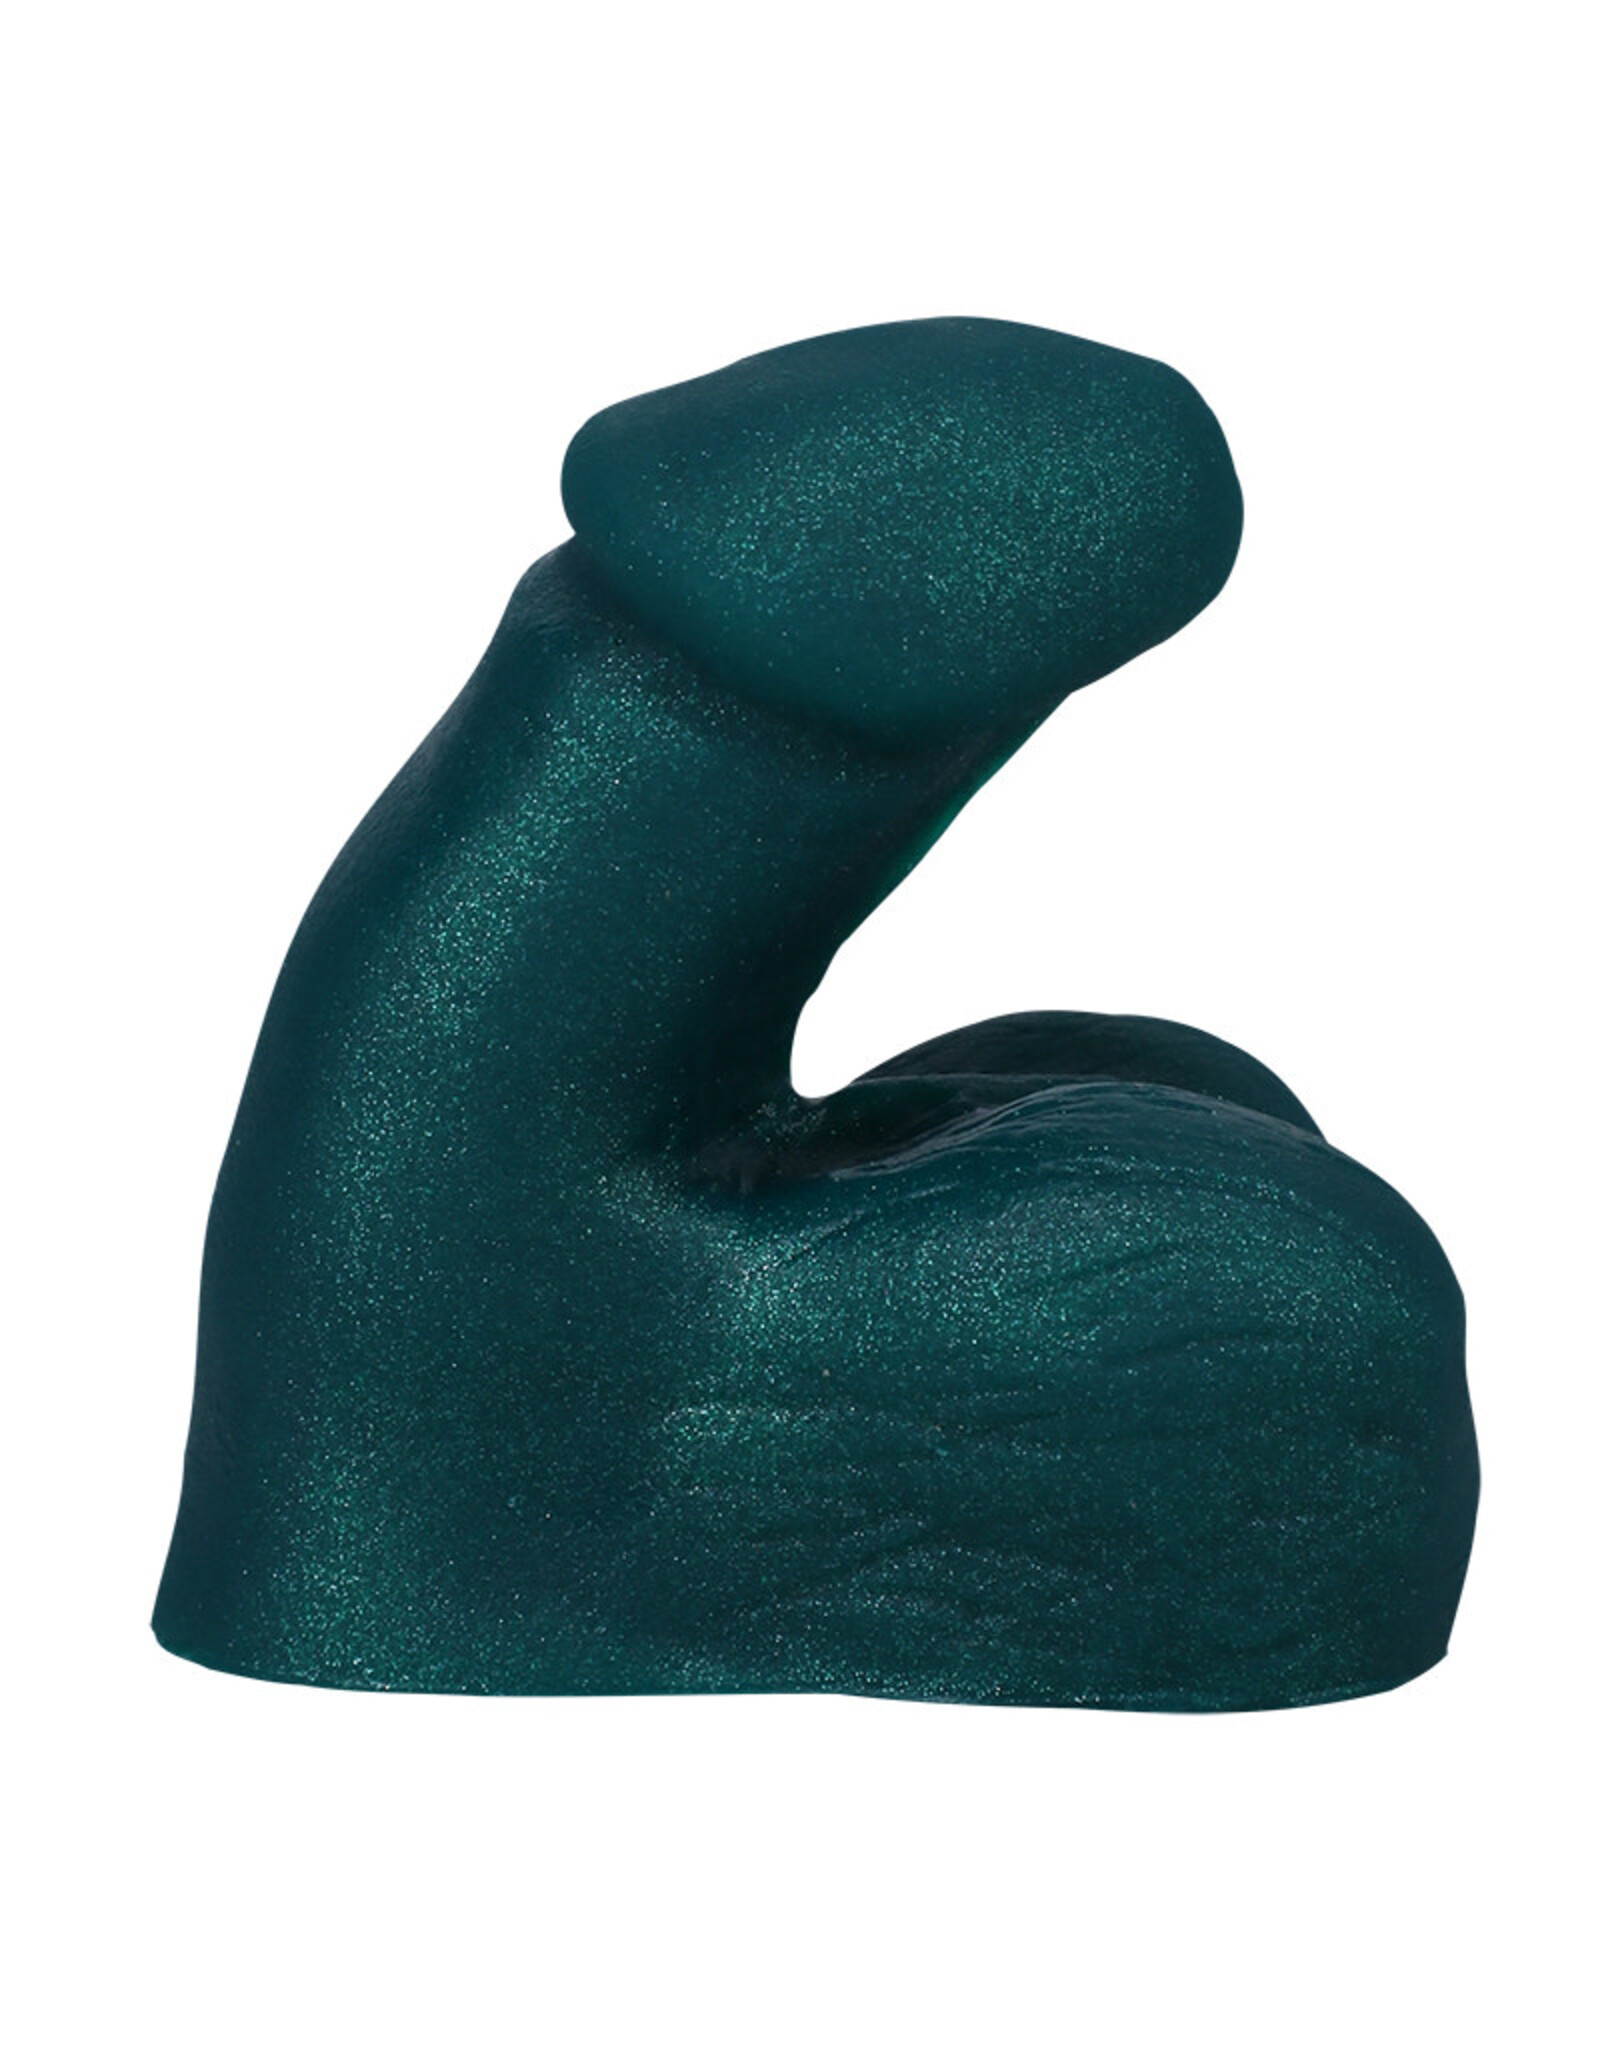 Tantus - On The Go Silicone Packer - Emerald